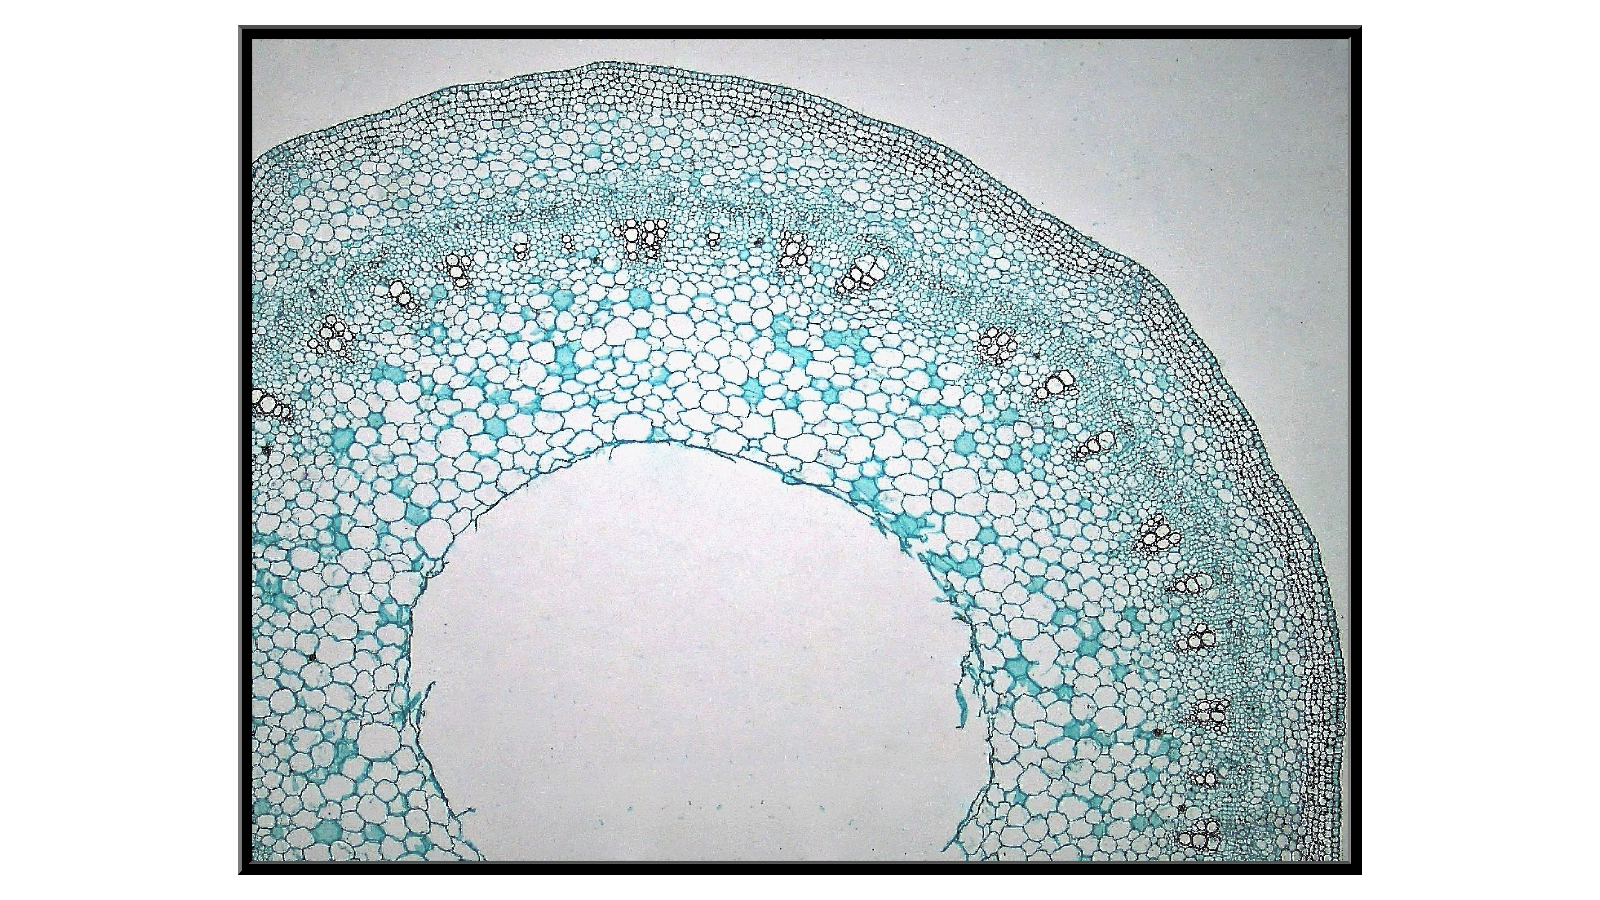 Cross-section through a young clover stem